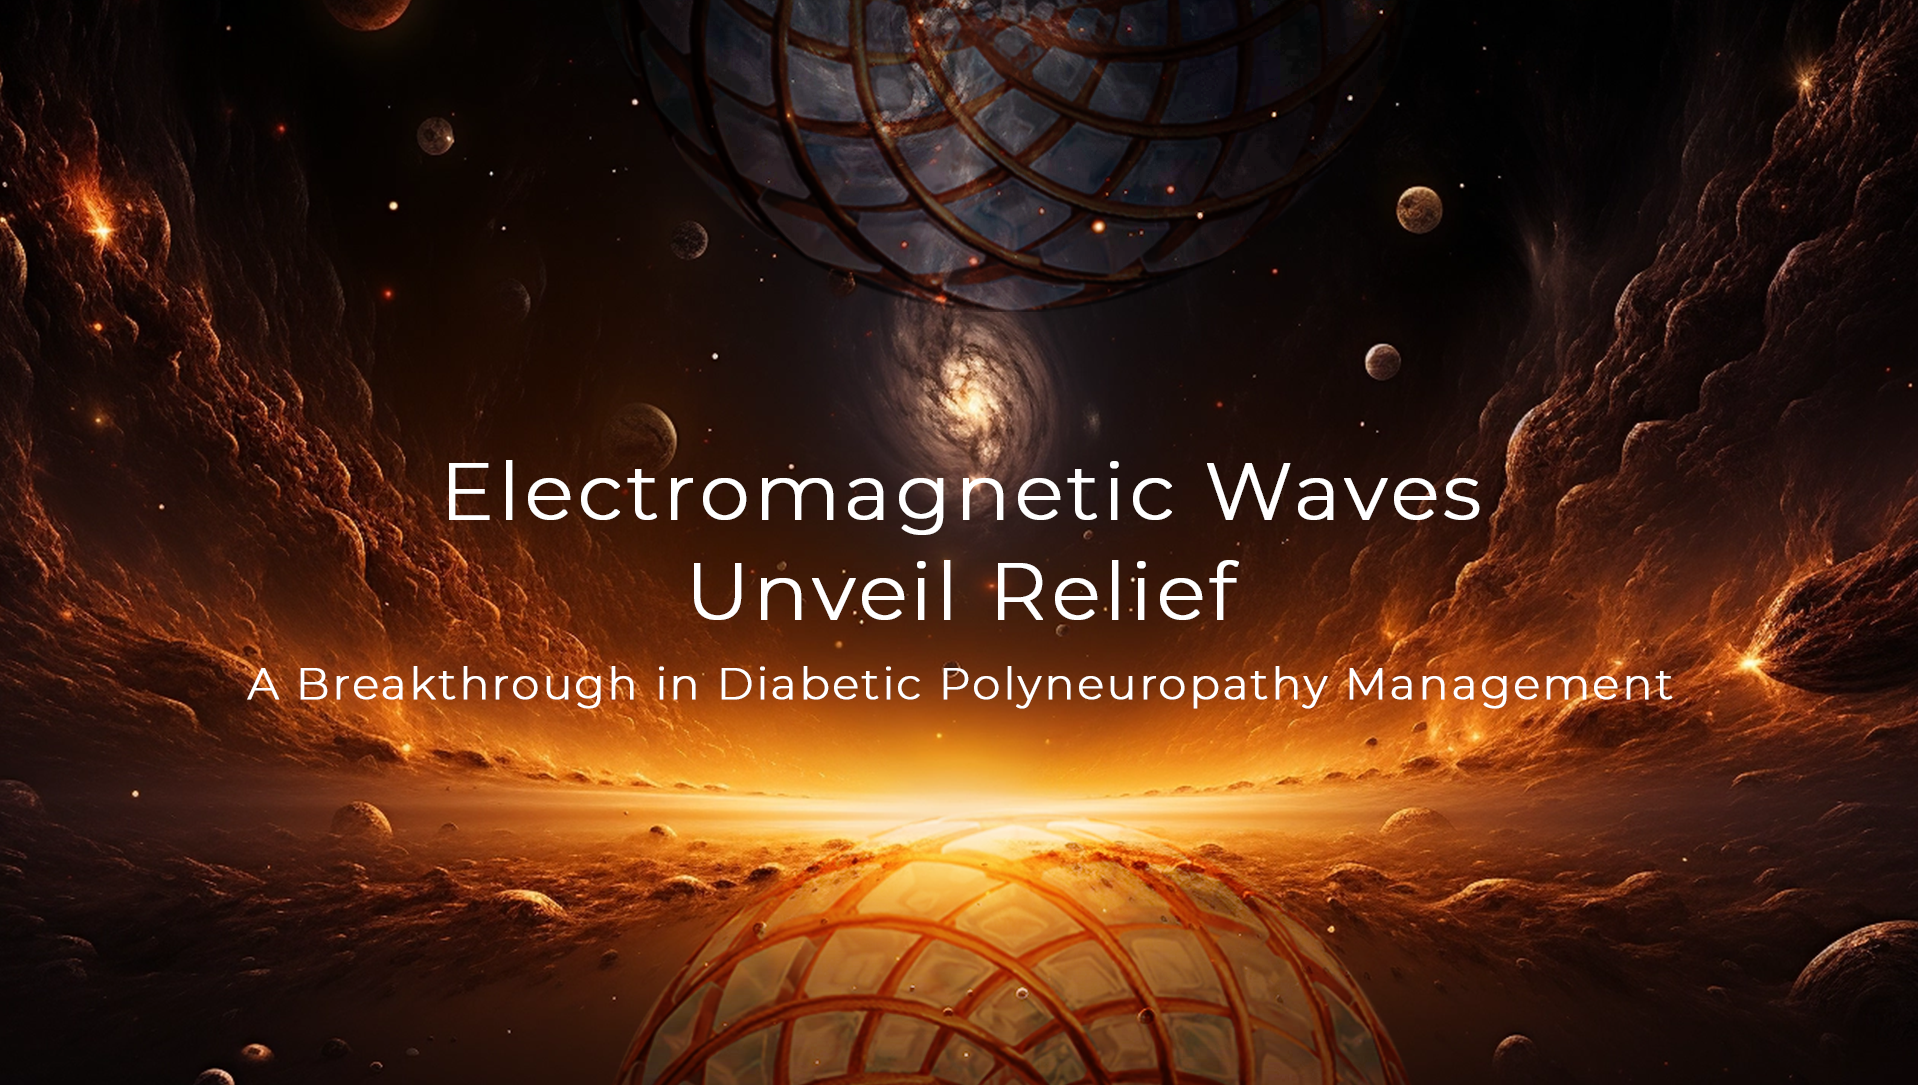 Electromagnetic Waves Unveil Relief: A Breakthrough in Diabetic Polyneuropathy Management